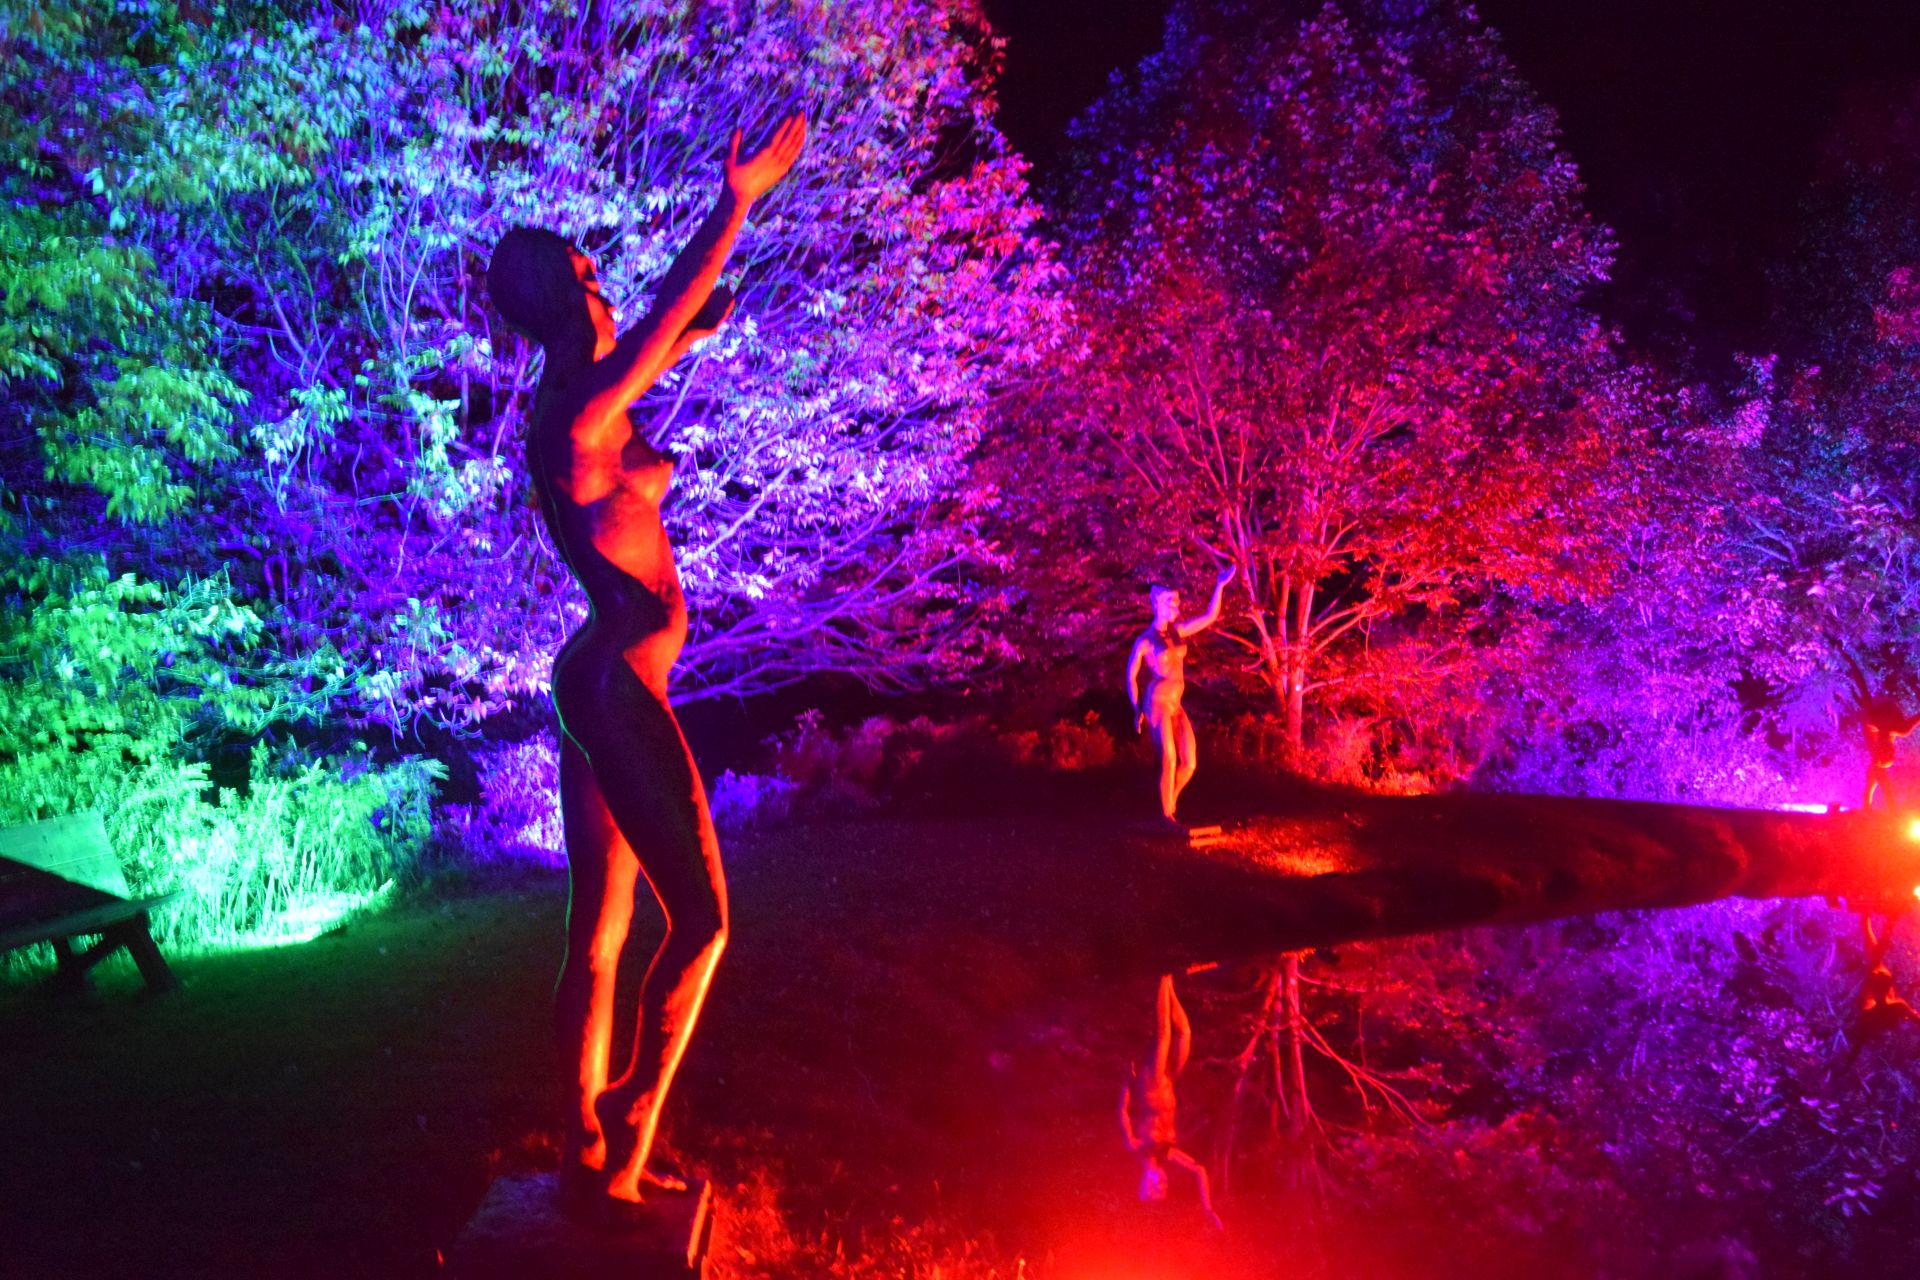 SitlerHQ set to produce 8th annual NIGHT LIGHTS at Griffis Sculpture Park